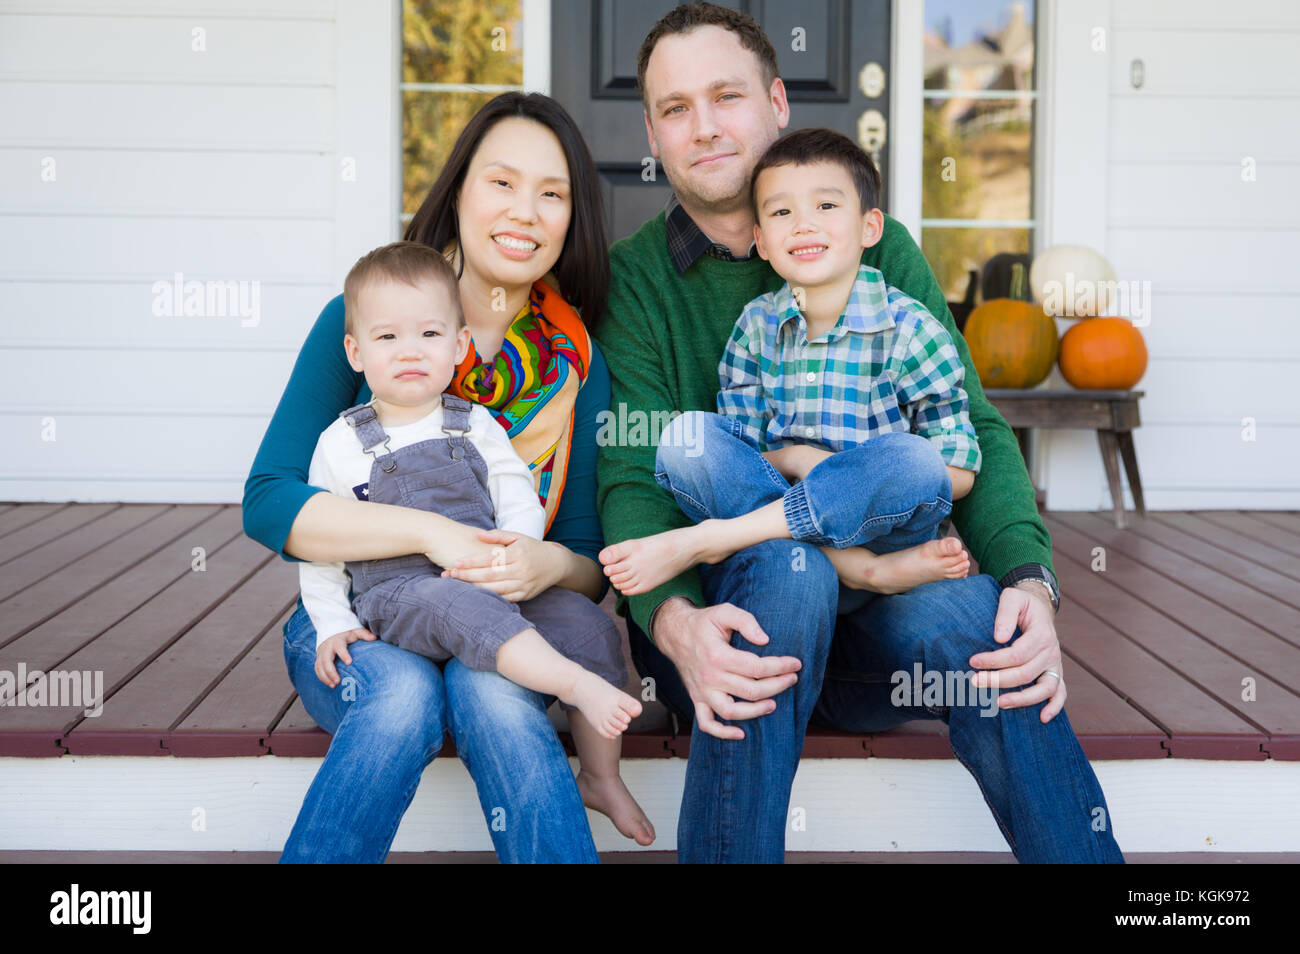 Mixed Race Chinese and Caucasian Young Family Portrait Stock Photo